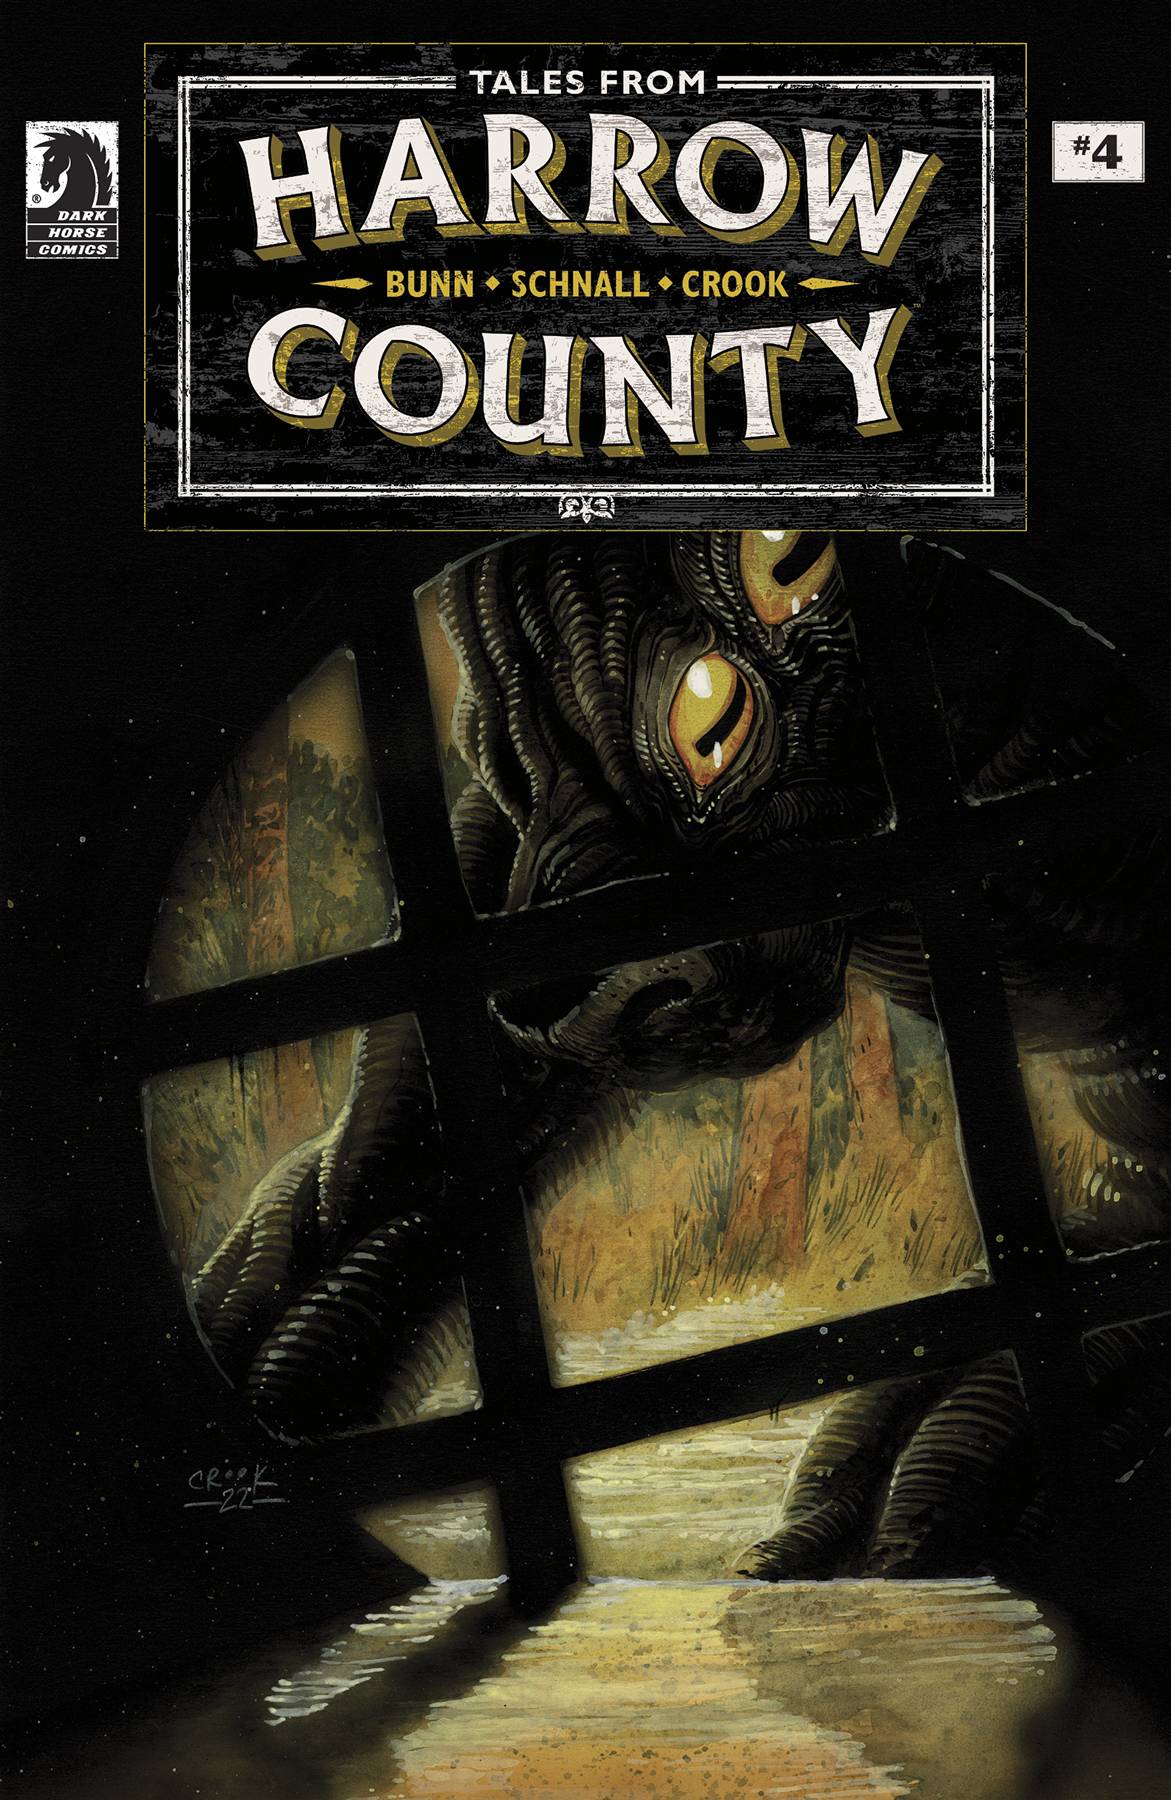 TALES FROM HARROW COUNTY LOST ONES #4 (OF 4) CVR B CROOK